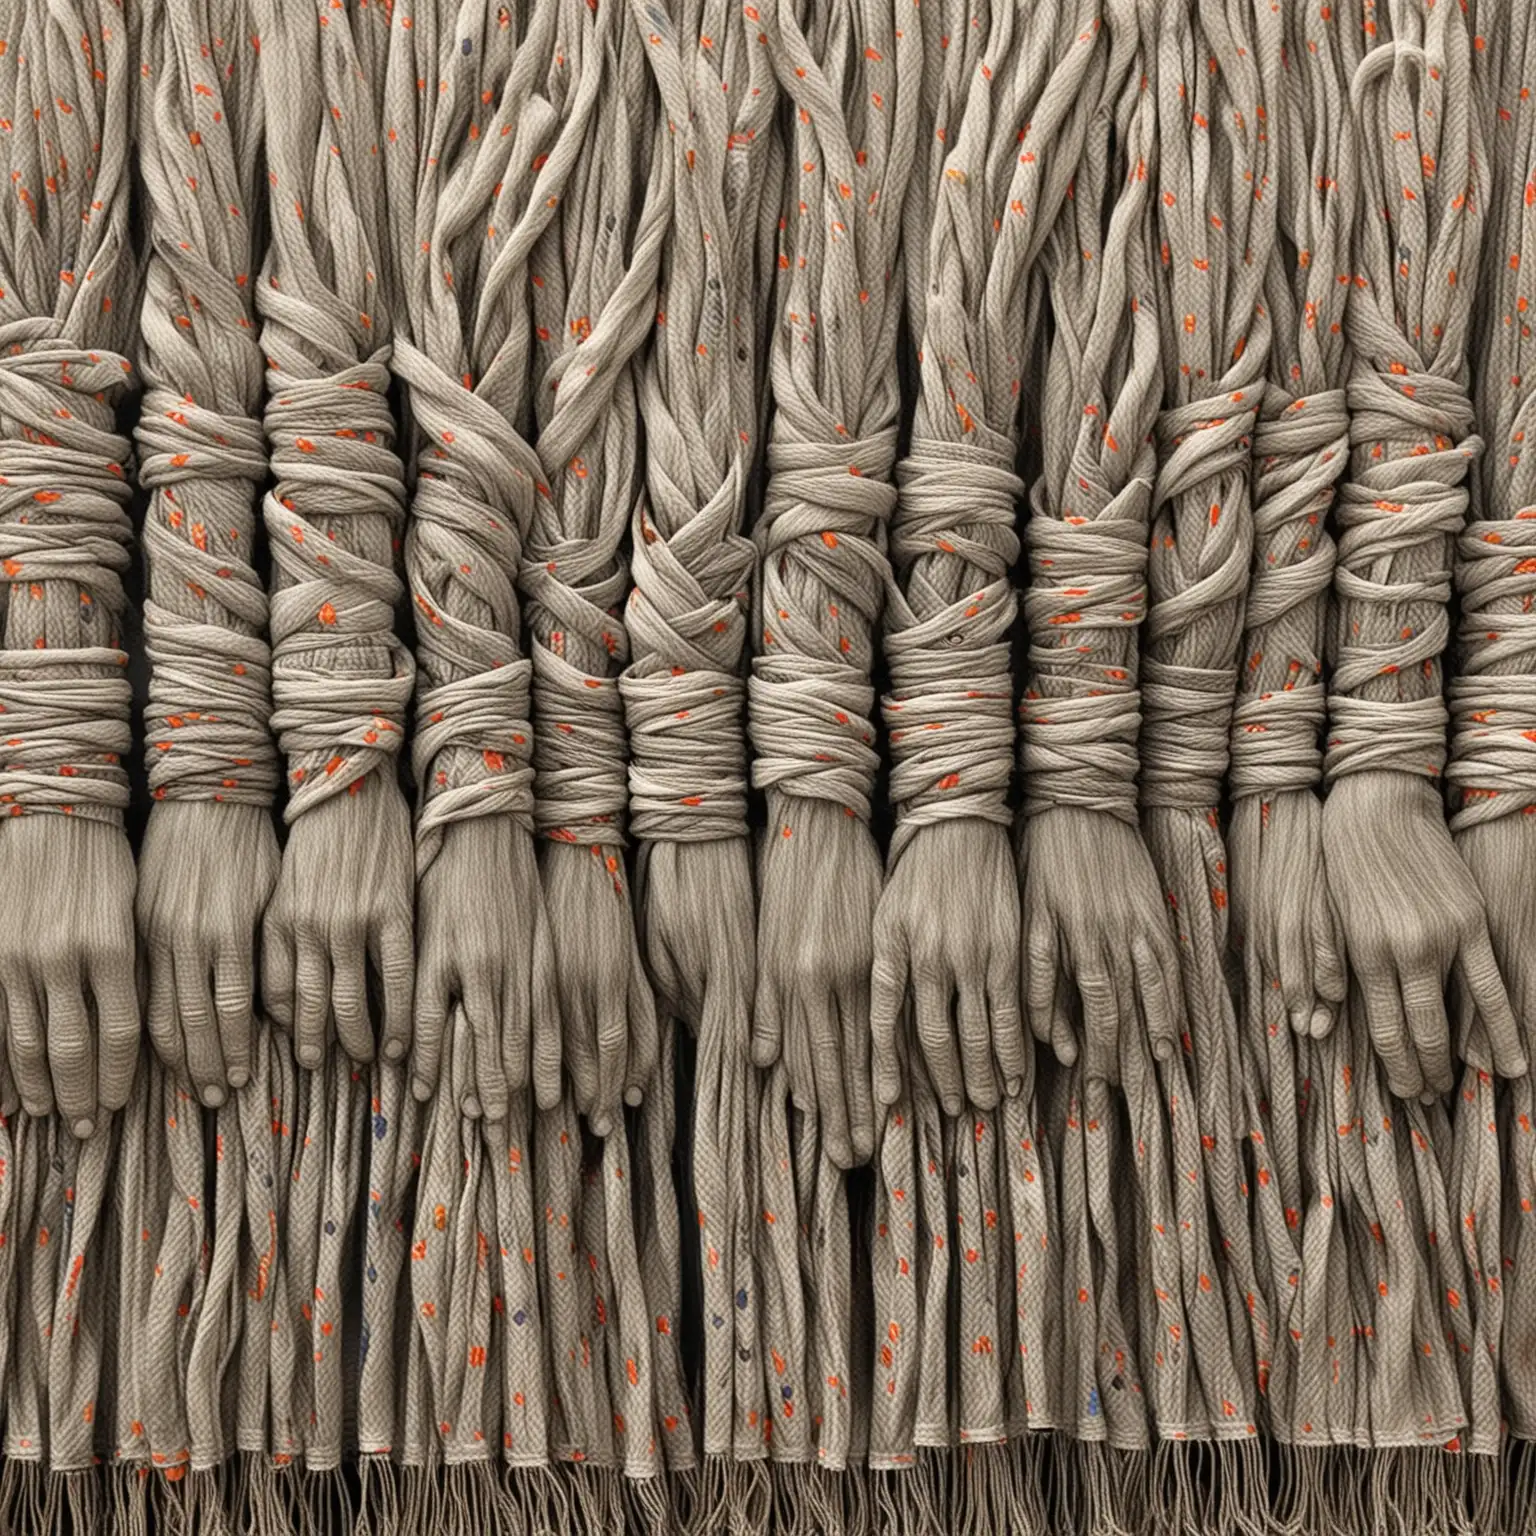 Social Justice Textile Art Hands Bound in Fabric Symbolizing Clothing Sweatshop Workers in America